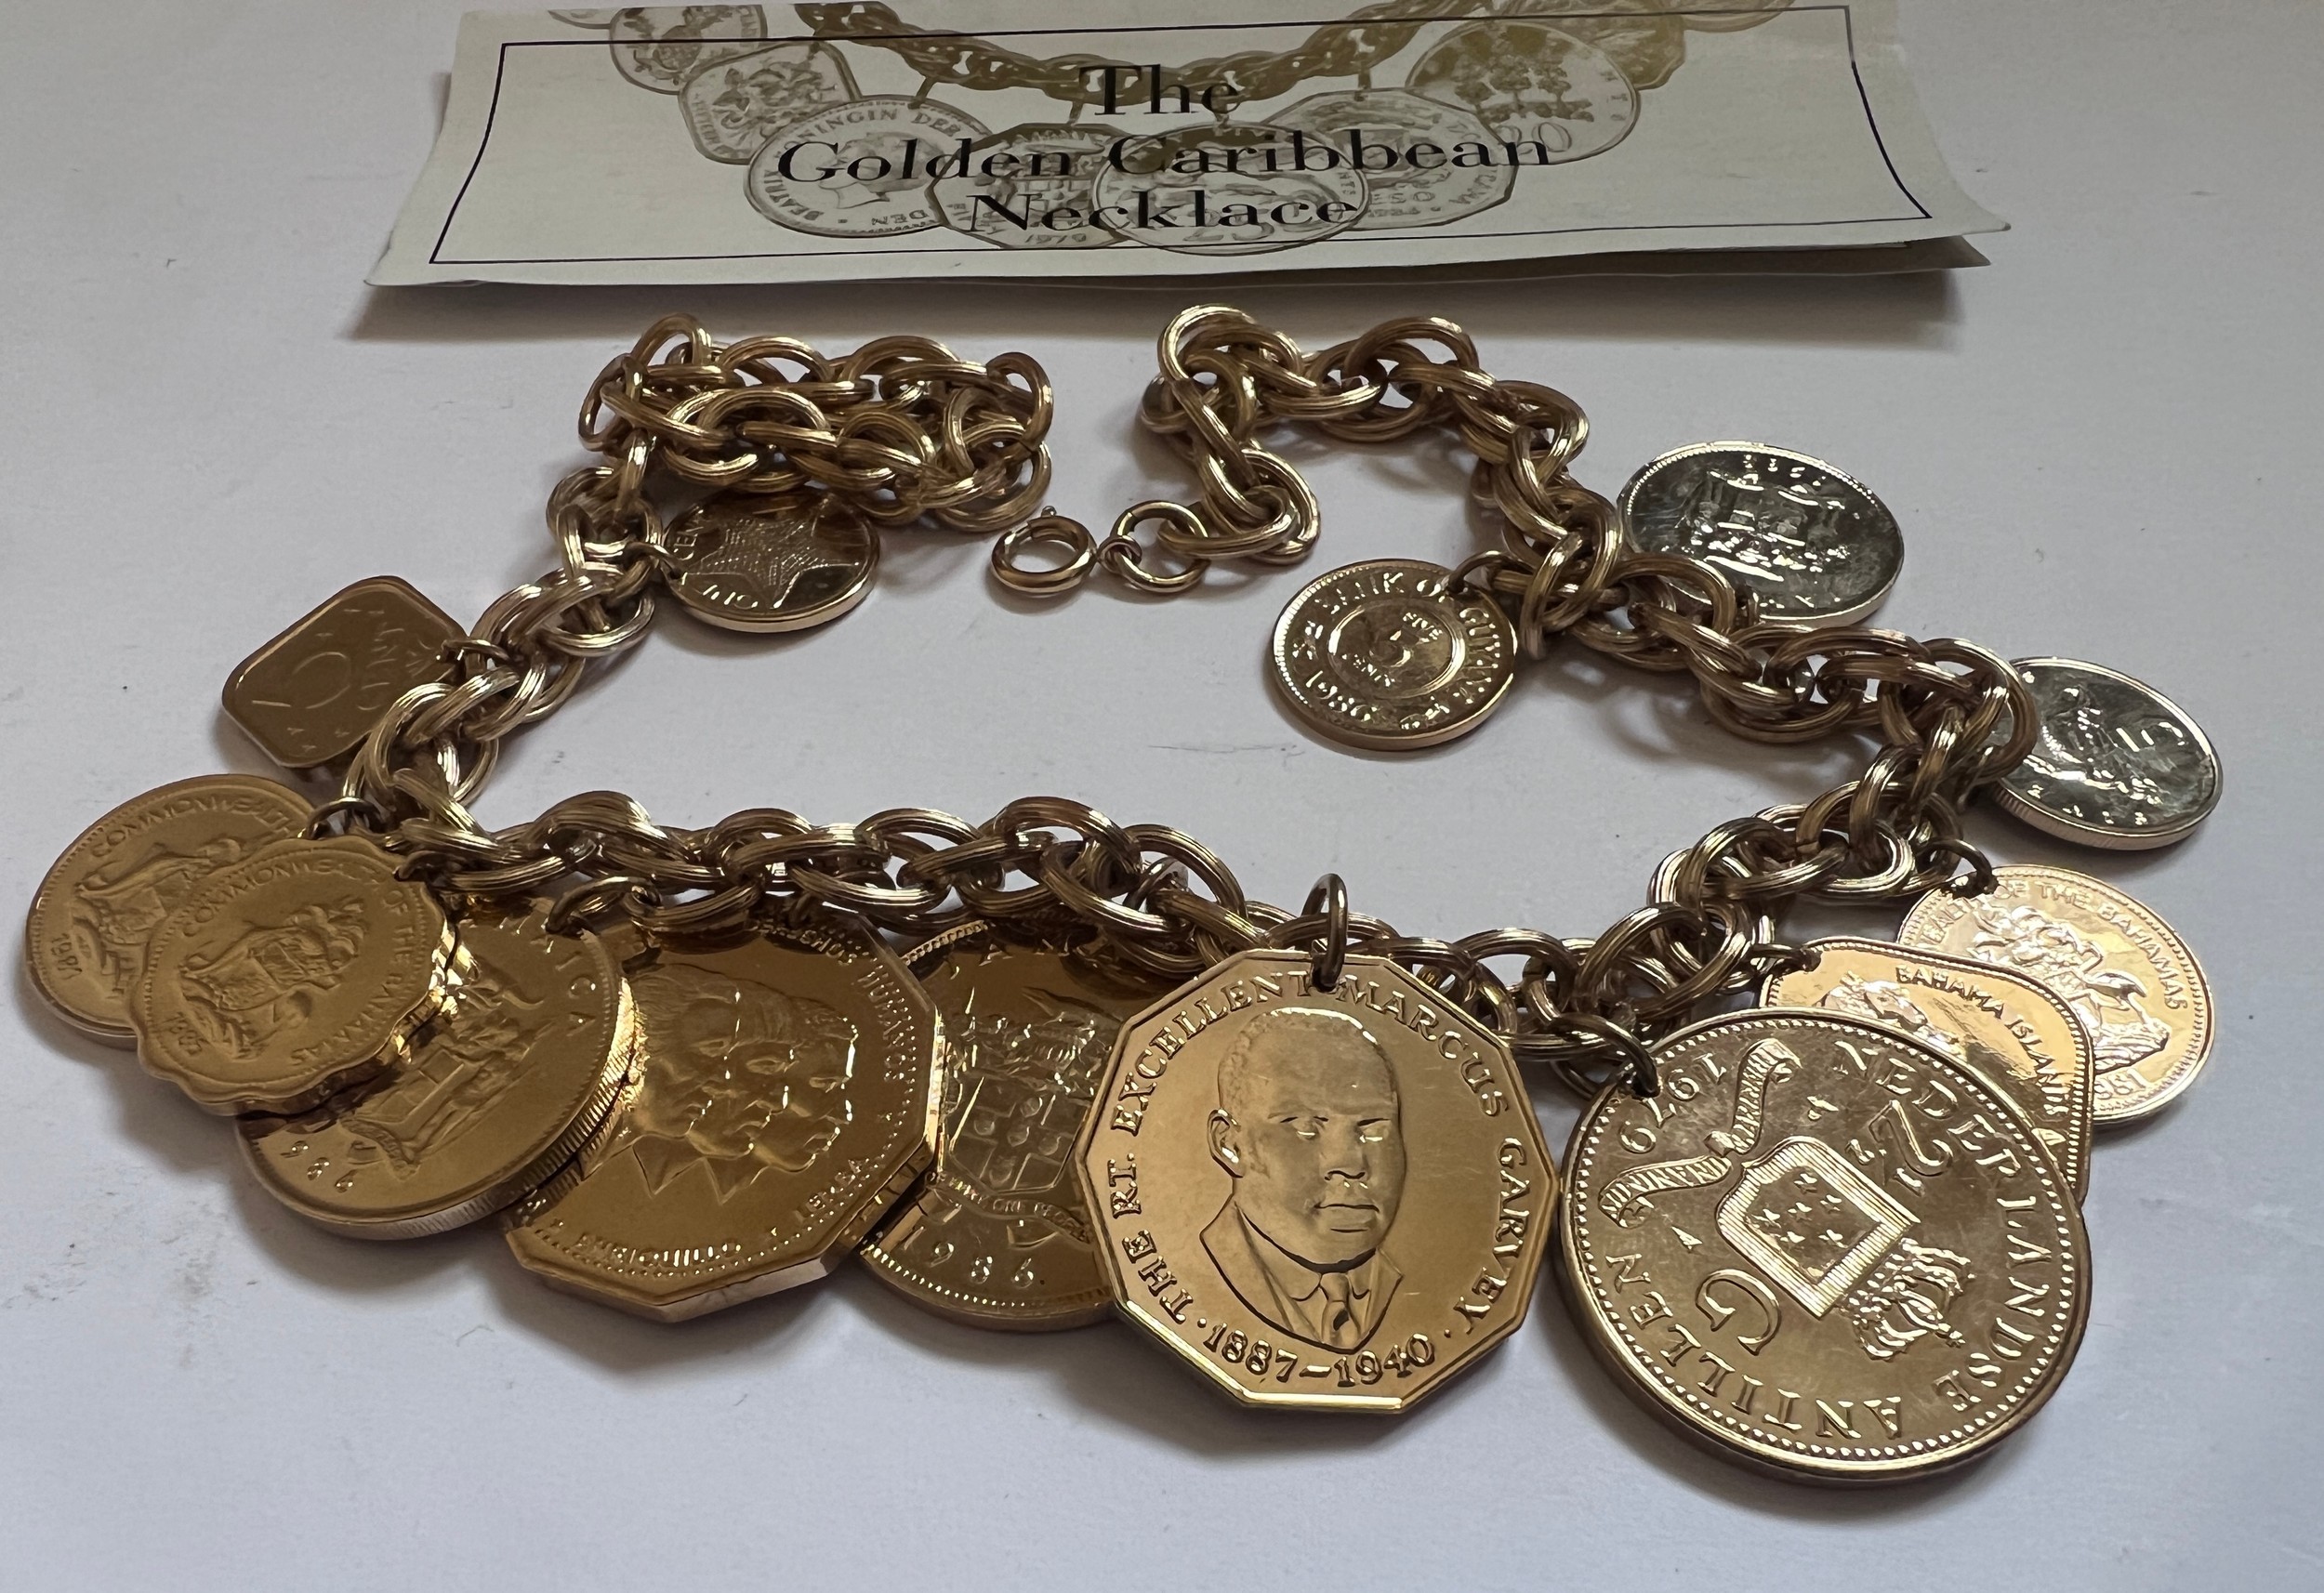 Franklin mint, a gold plated 'The Golden Caribbean Necklace' with coins from the Caribbean - Image 2 of 3